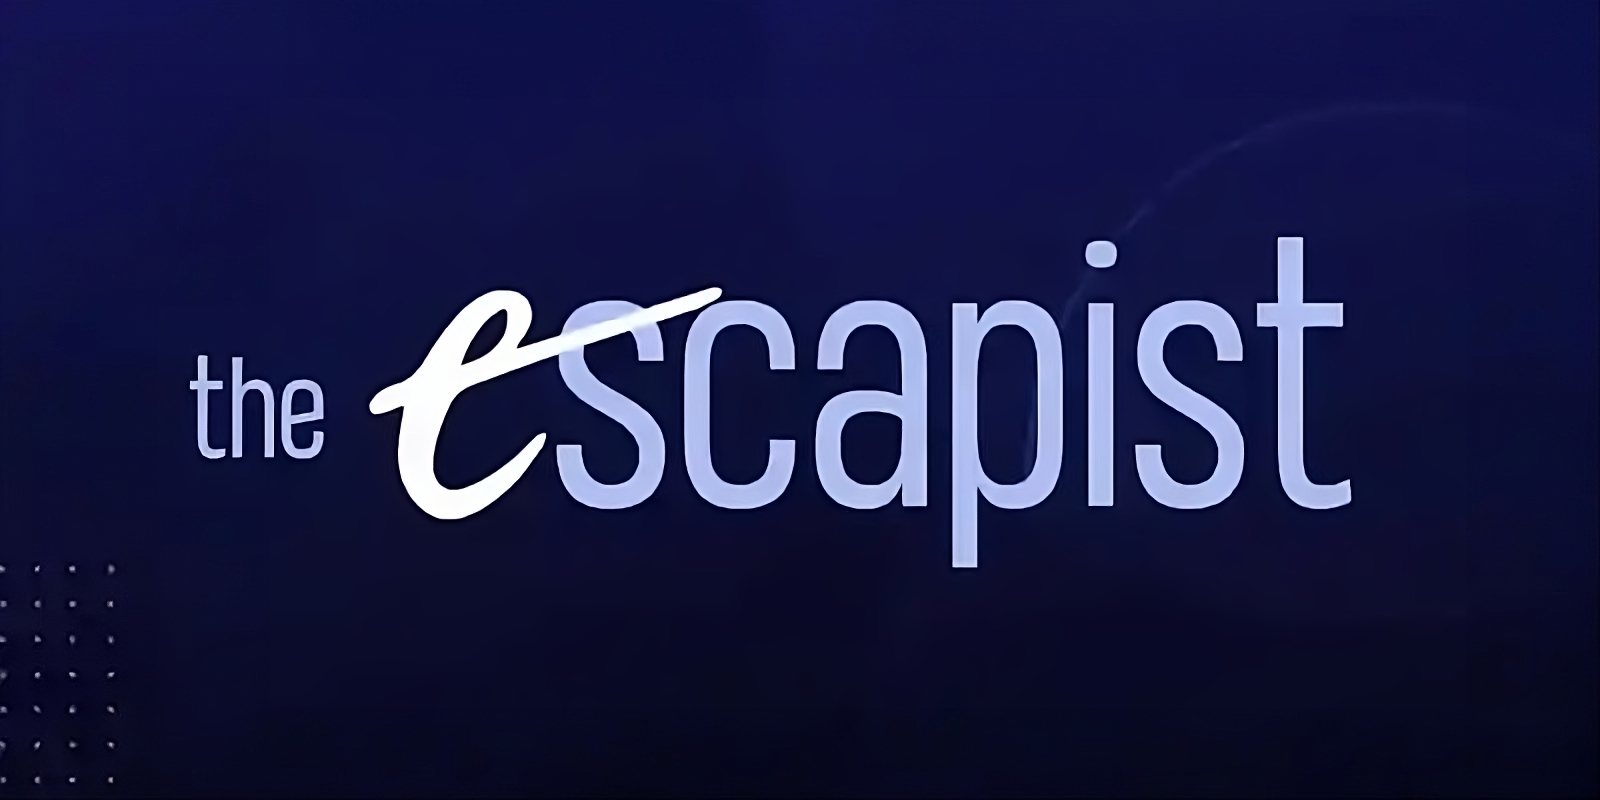 The Escapist fires Editor-in-Chief Nick Calandra prompting further resignations